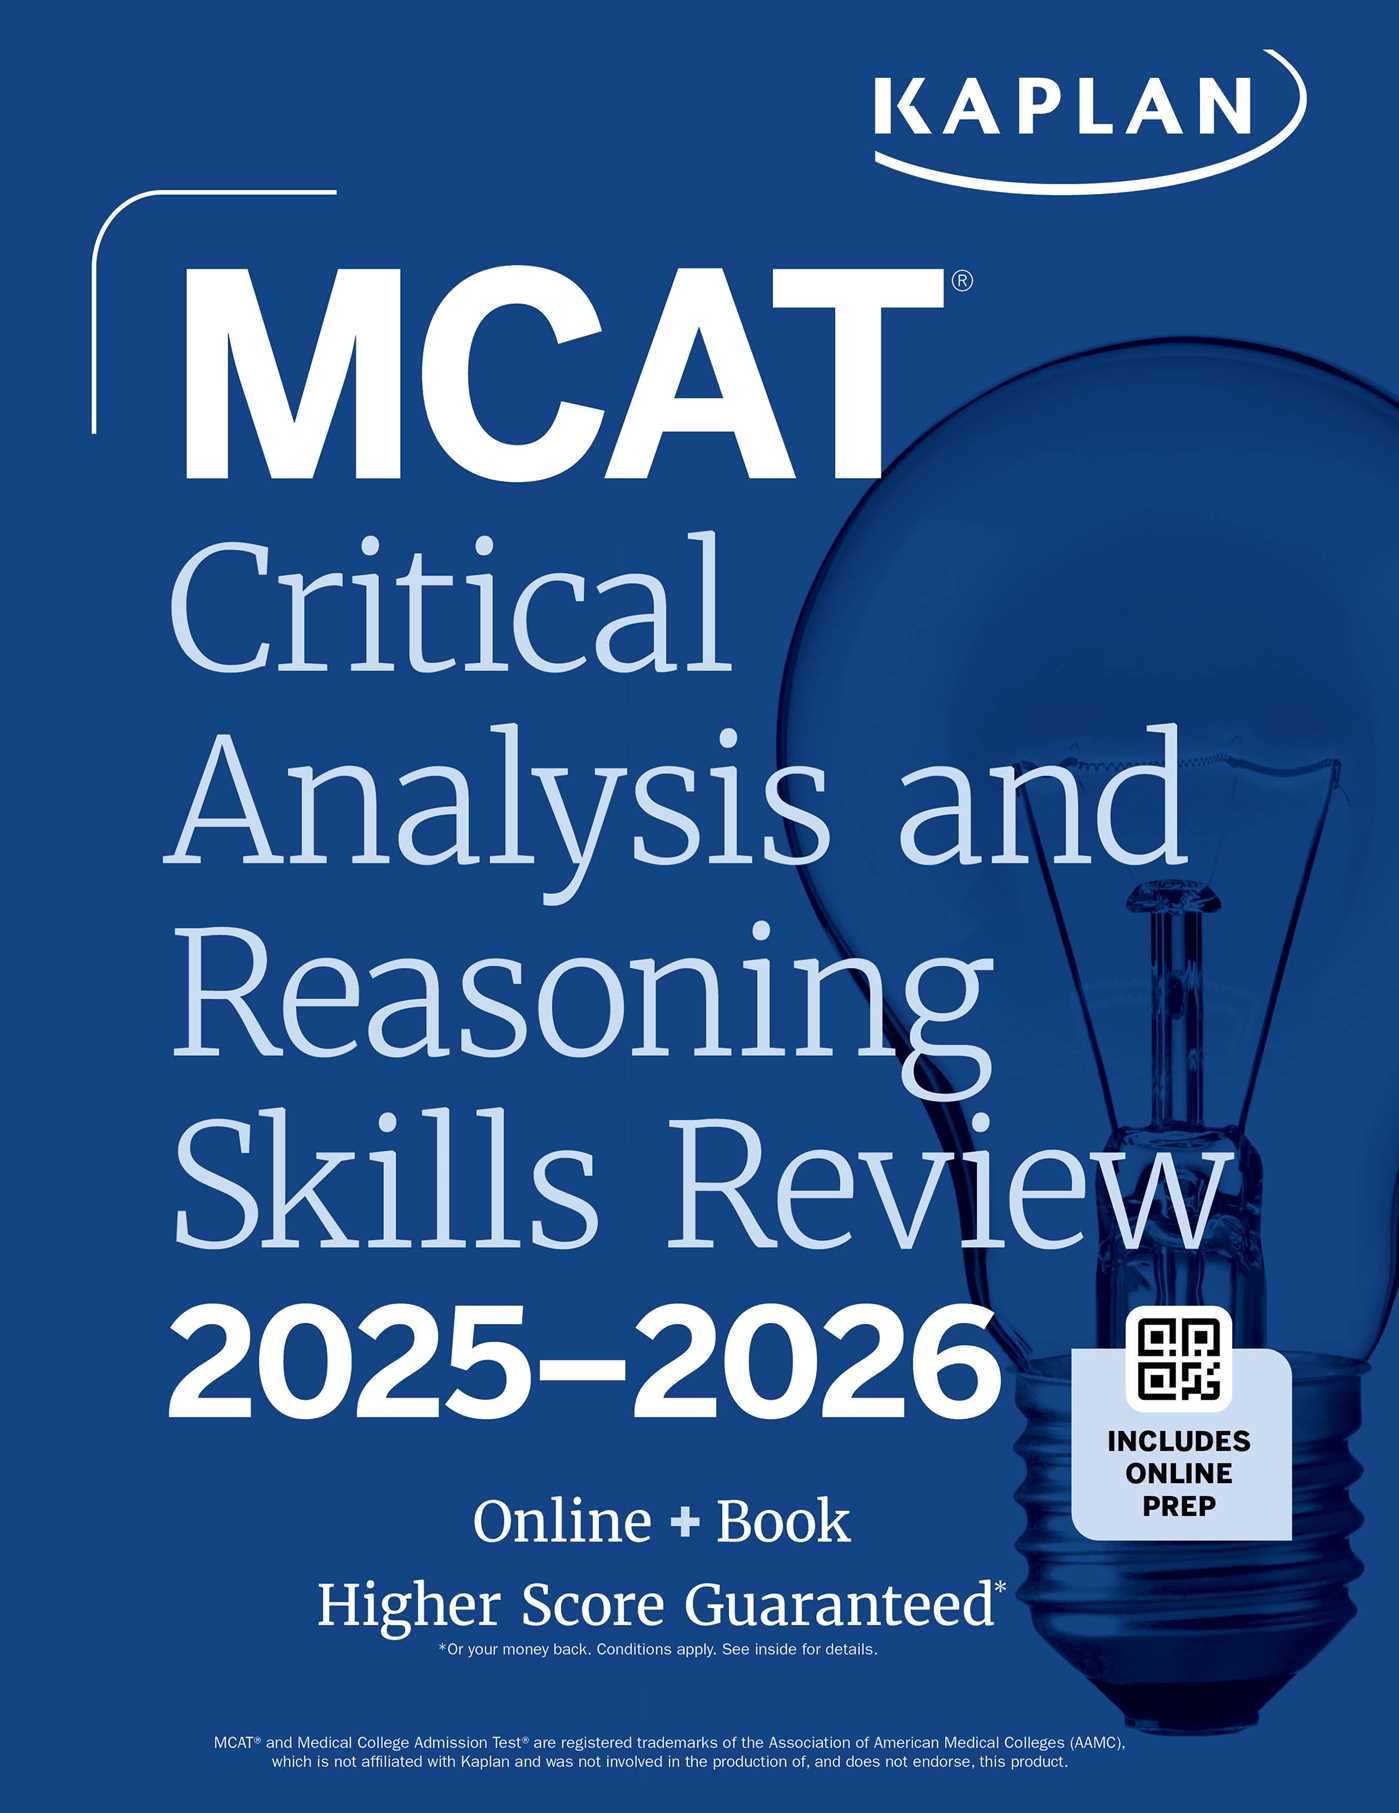 MCAT CRITICAL ANALYSIS AND REASONING SKILLS REVIEW 2025-2026, by KAPLAN TEST PREP